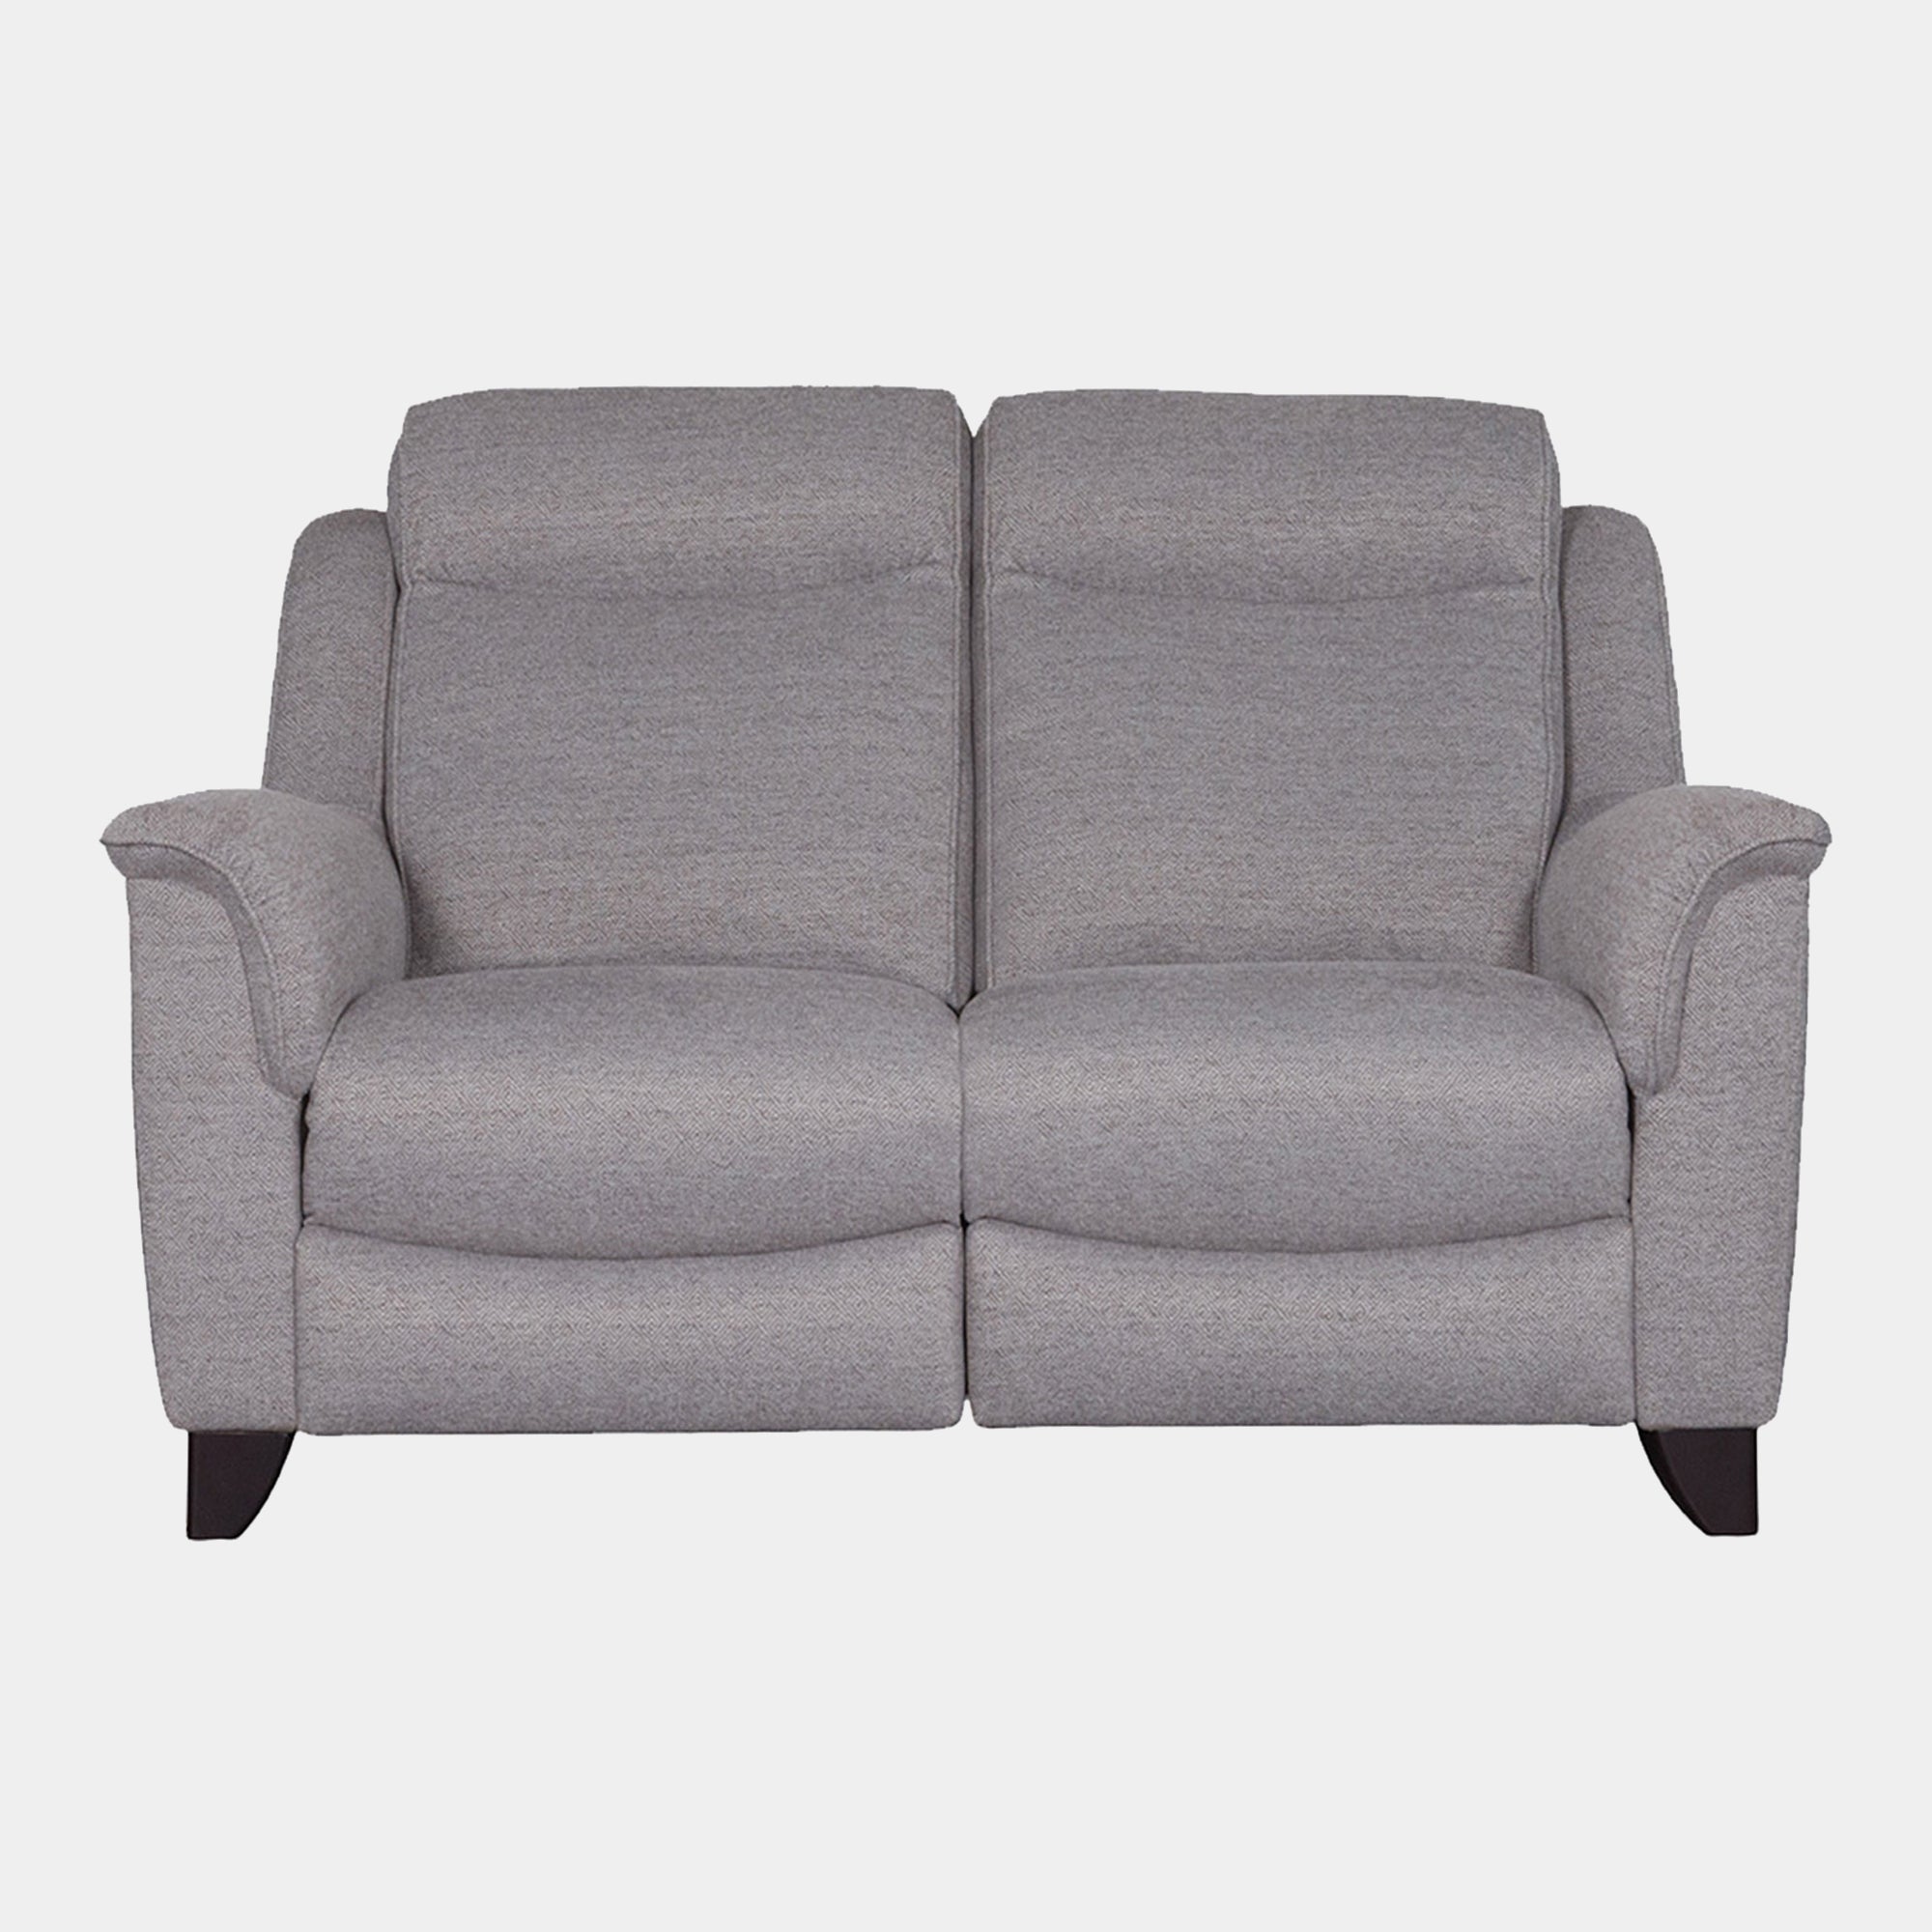 Parker Knoll Manhattan - 2 Seat Sofa Single Motor Double Power Recliners In Fabric Grade A